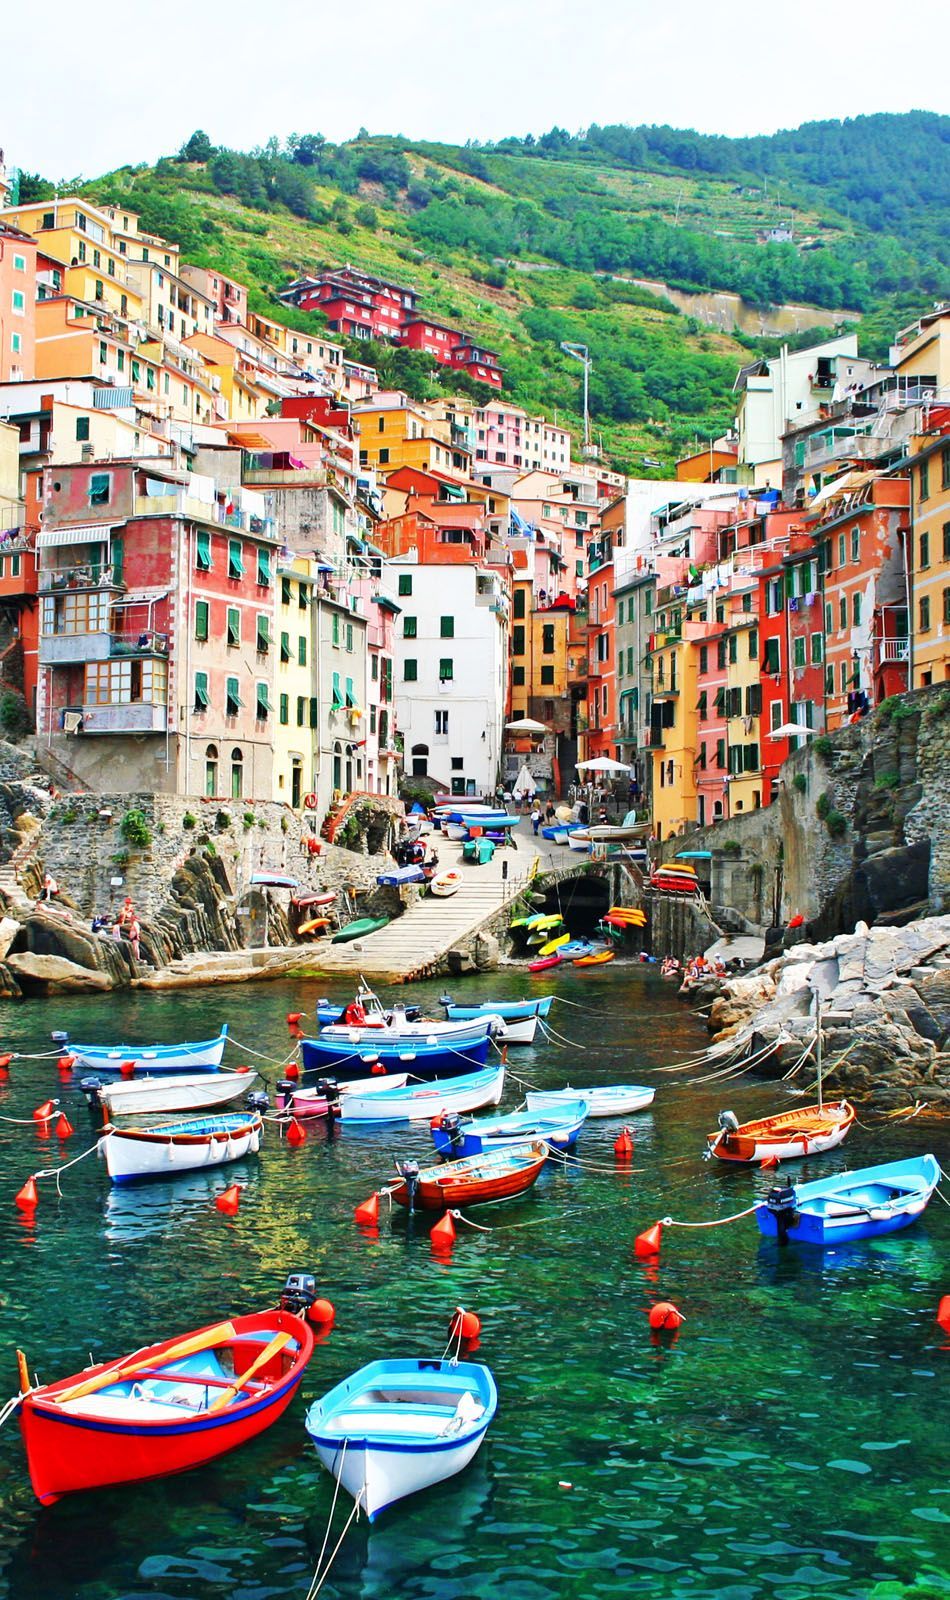 Italian seaside village of Riomaggiore in the Cinque Terre | Amazing Photography Of Cities and Famous Land